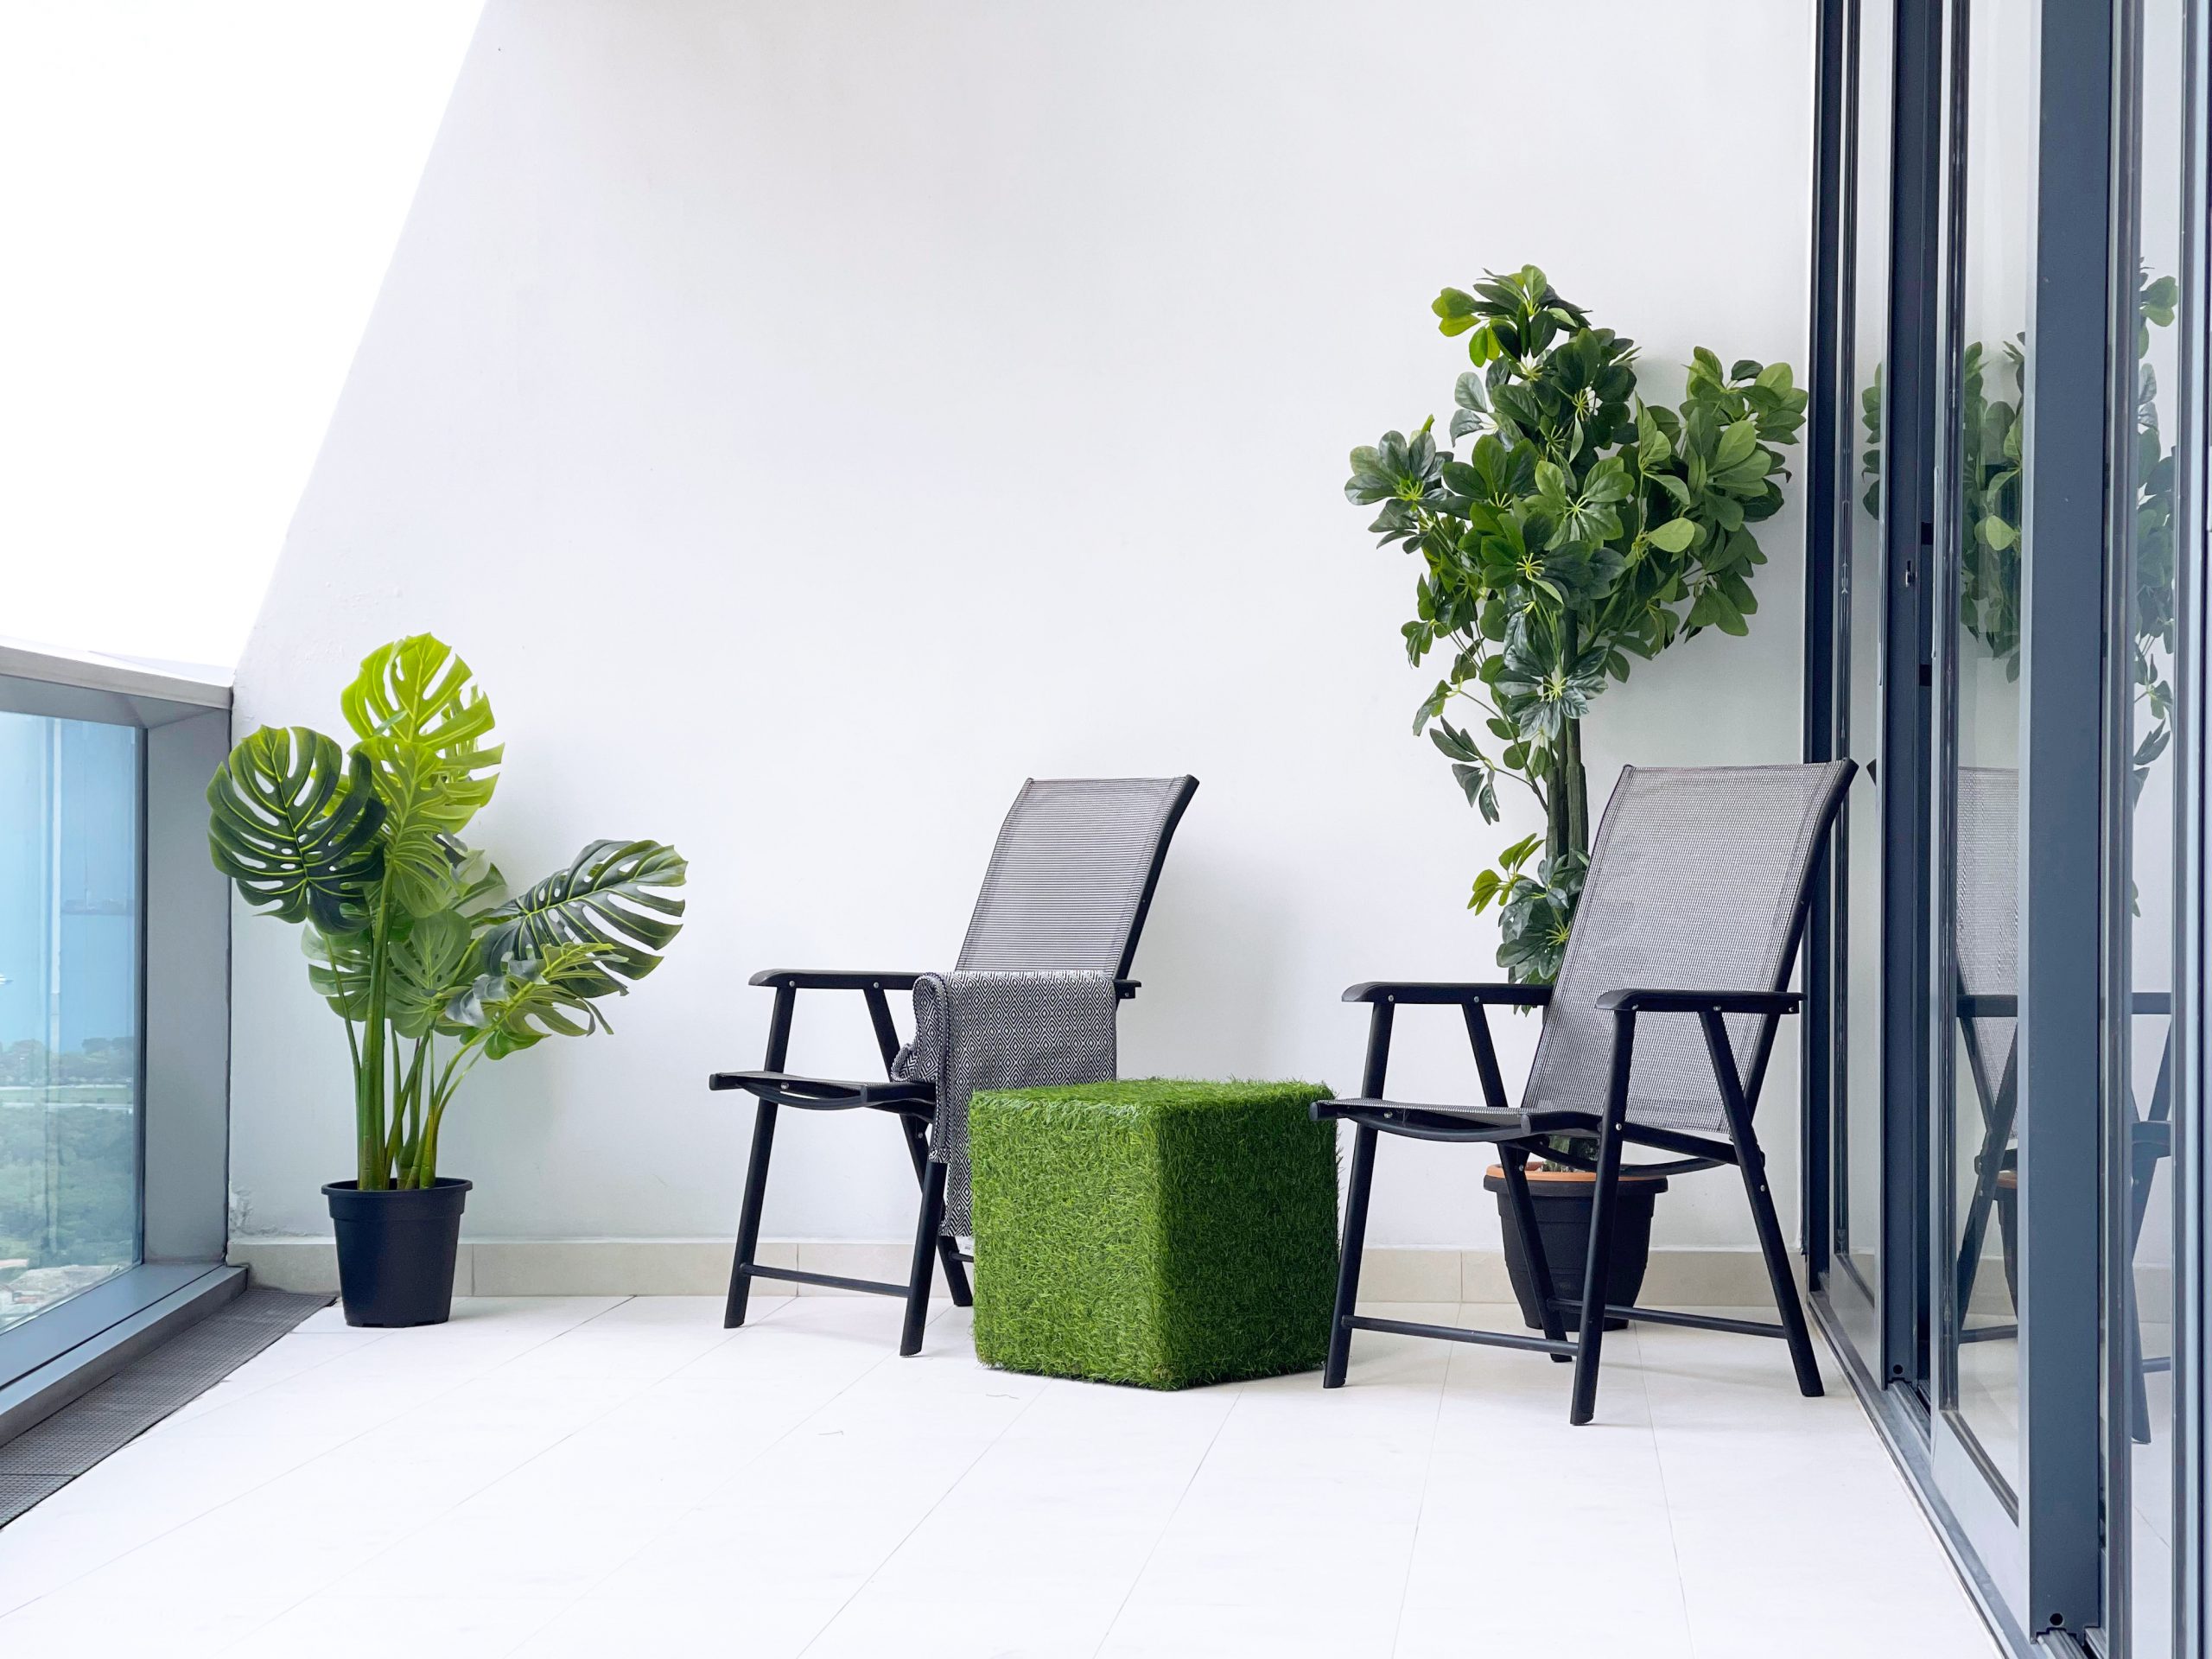 A balcony with two chairs and a potted plant.